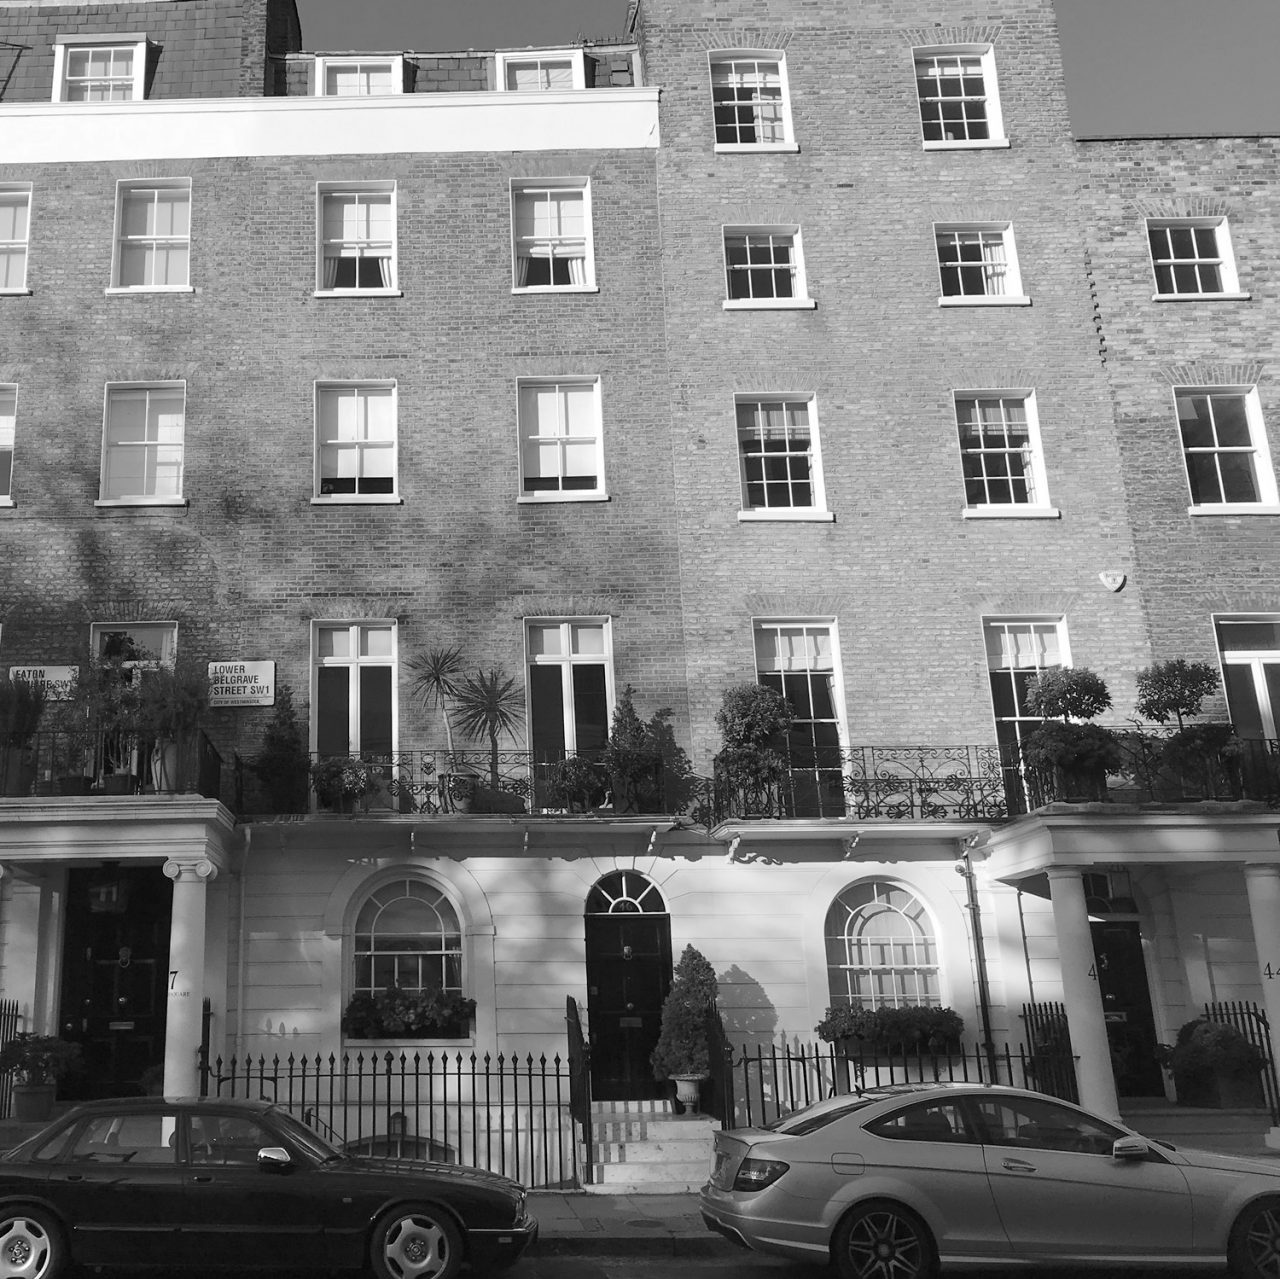 Lord Lucans House 46 Lower Belgrave Street